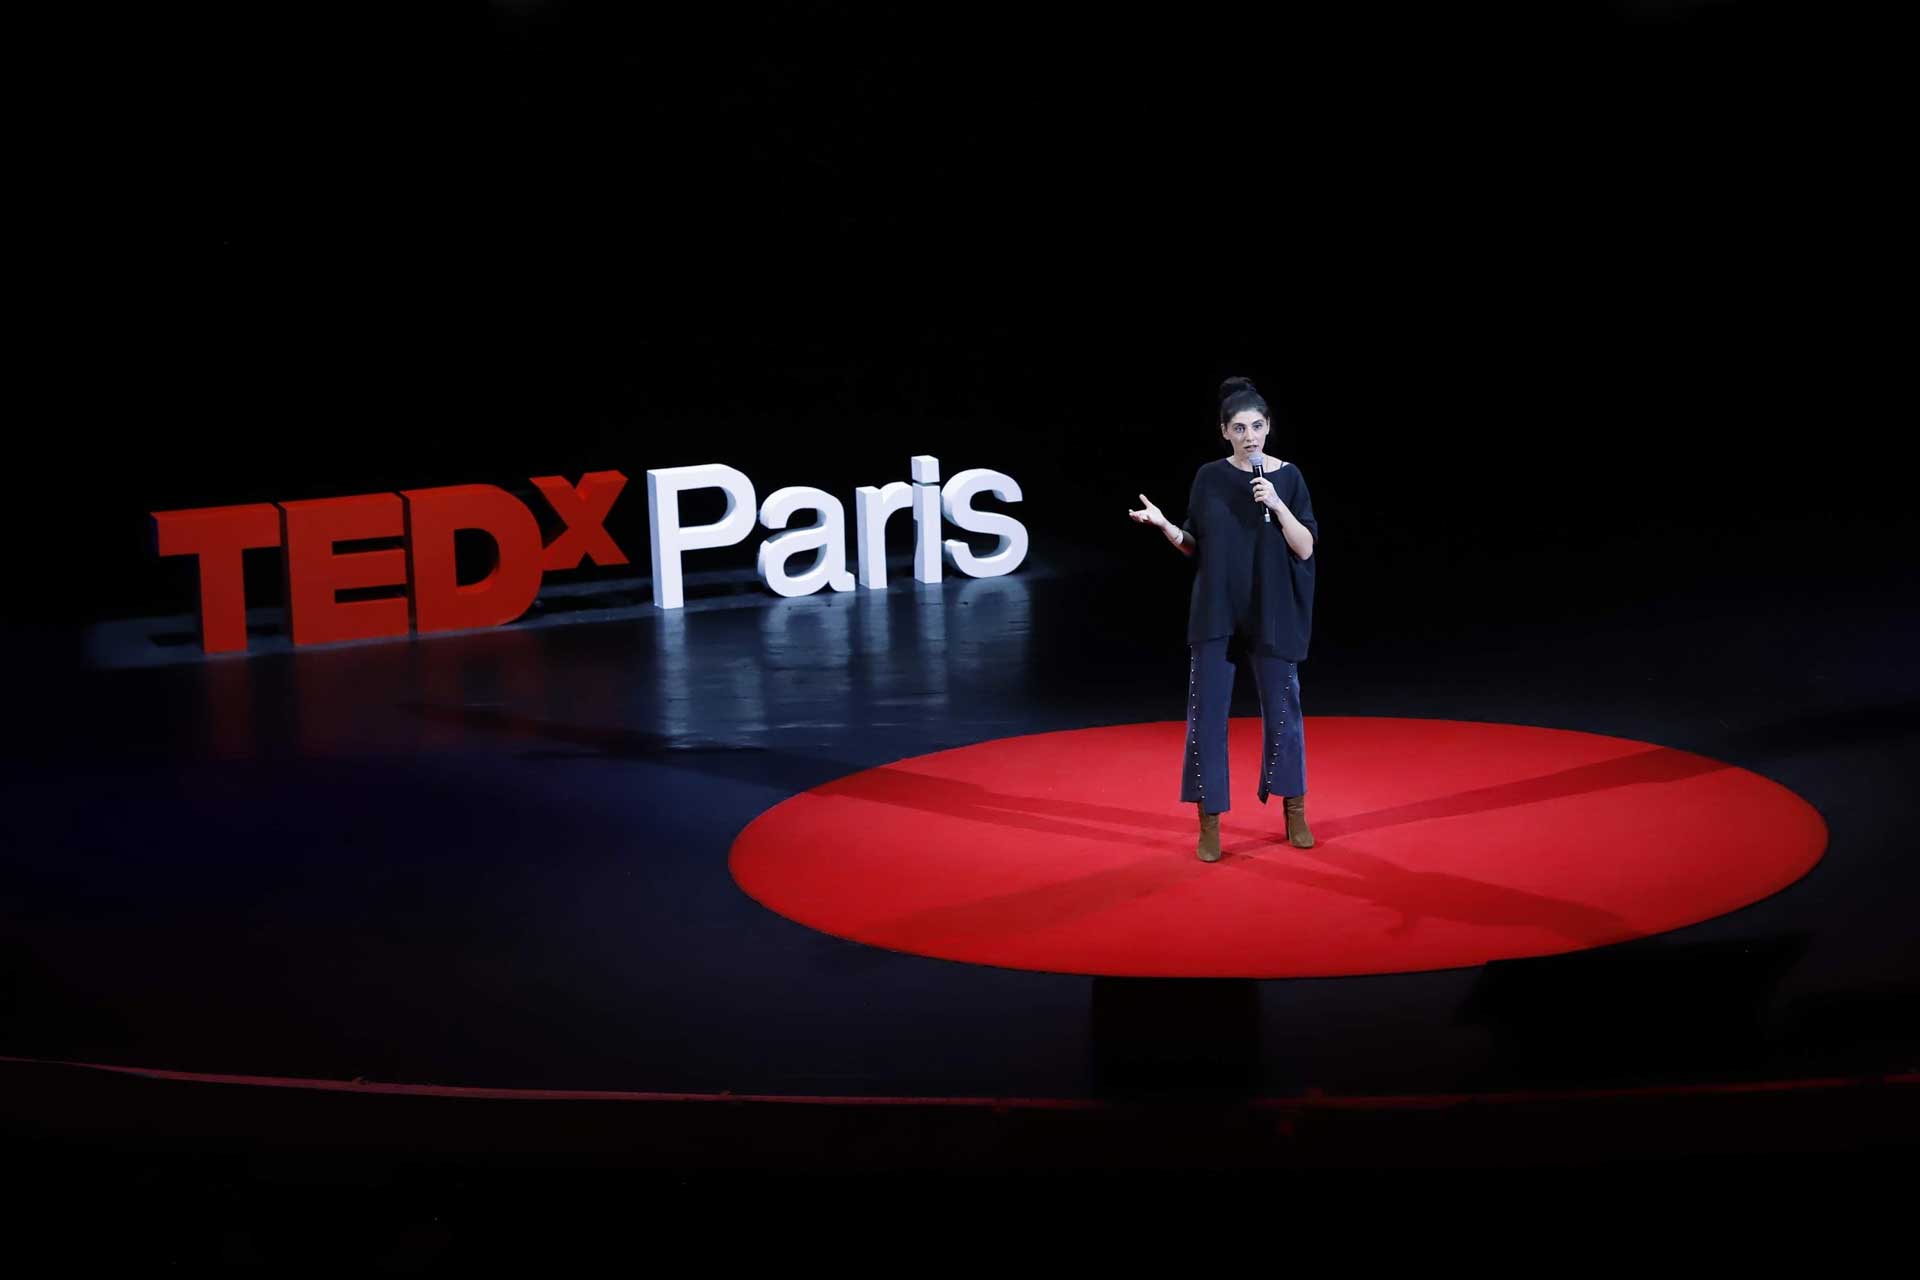 conference-TEDxParis-2018-14.jpg